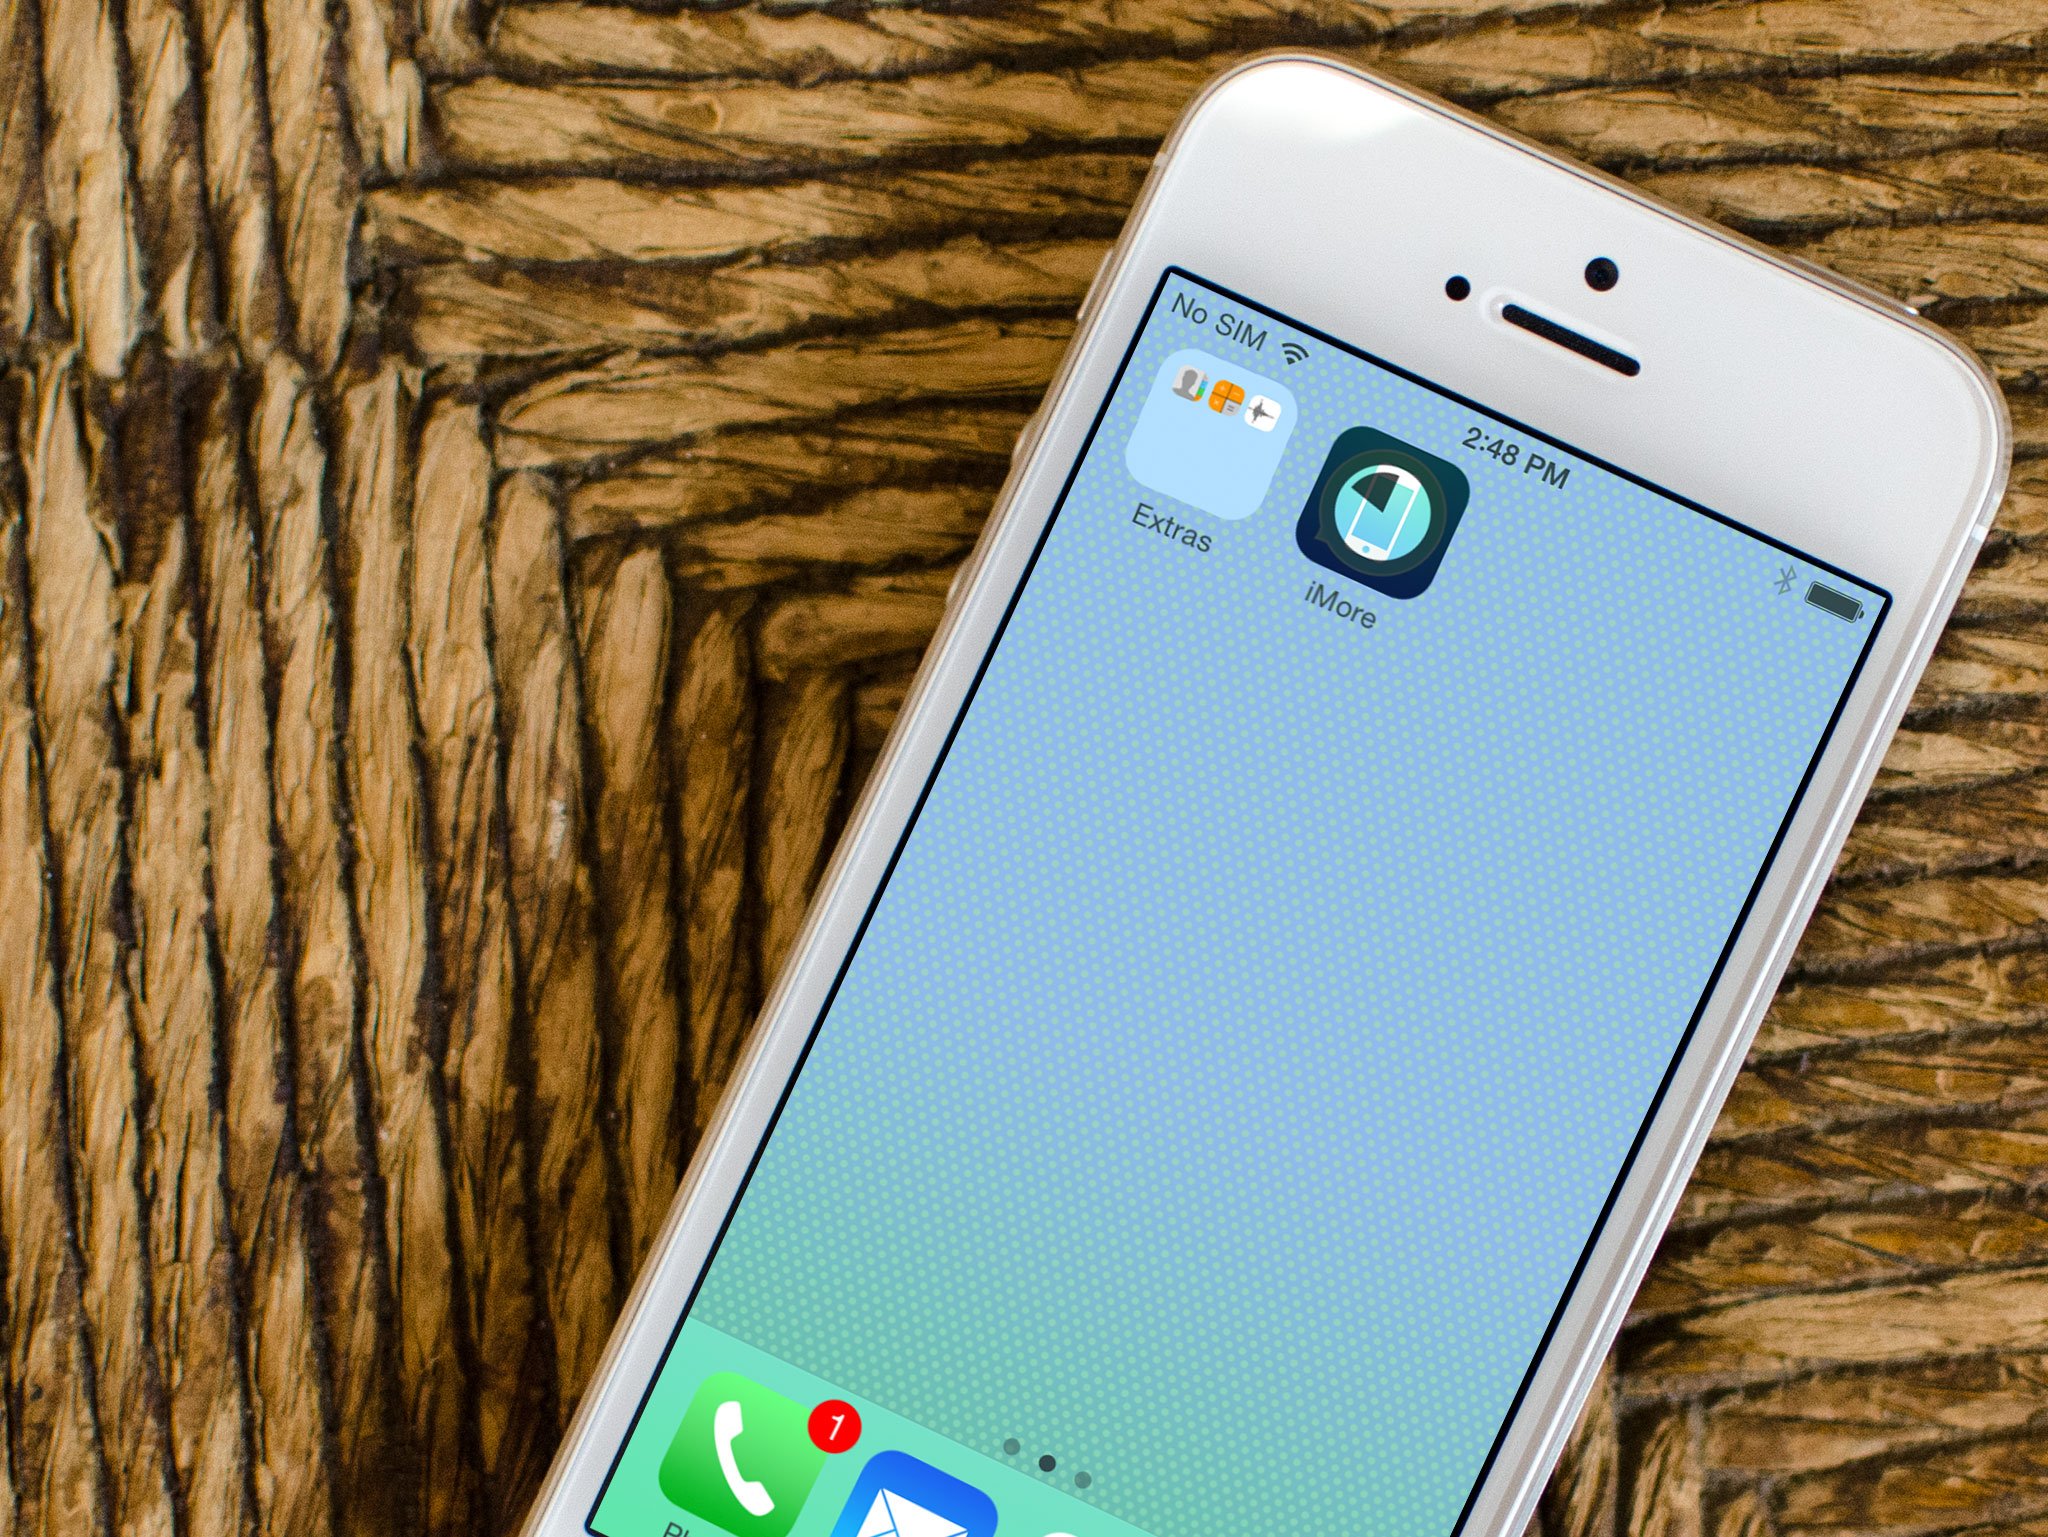 How to fix iPhone and iPad apps that hang up while downloading